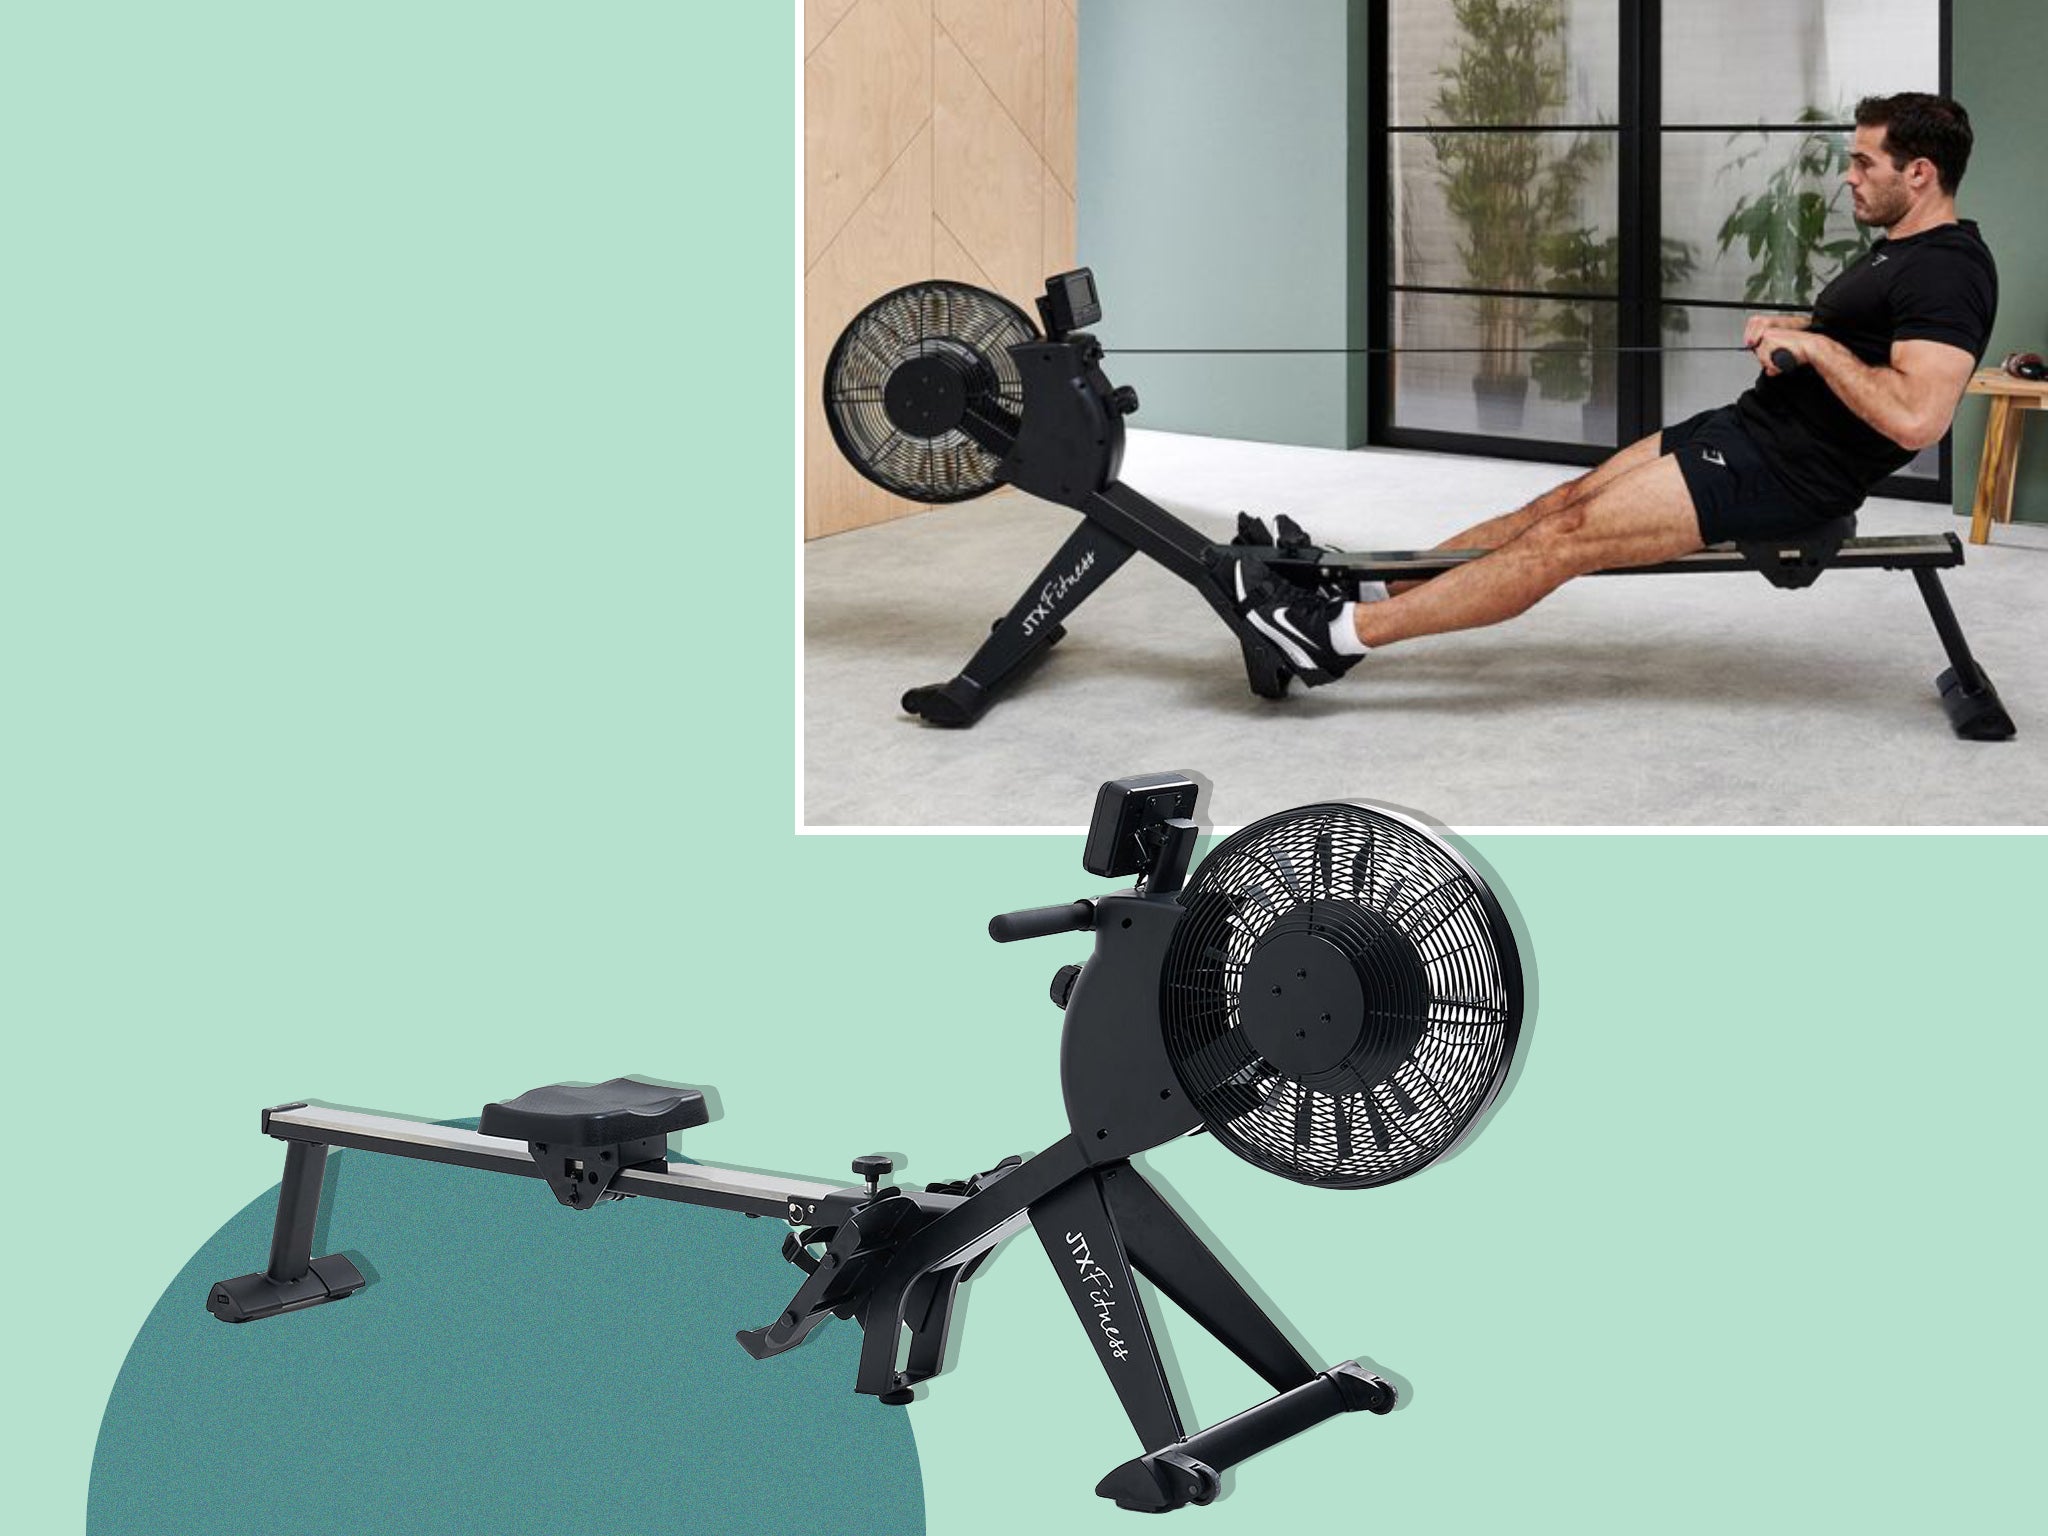 That uniquely lung-busting, leg-shredding workout this equipment can provide